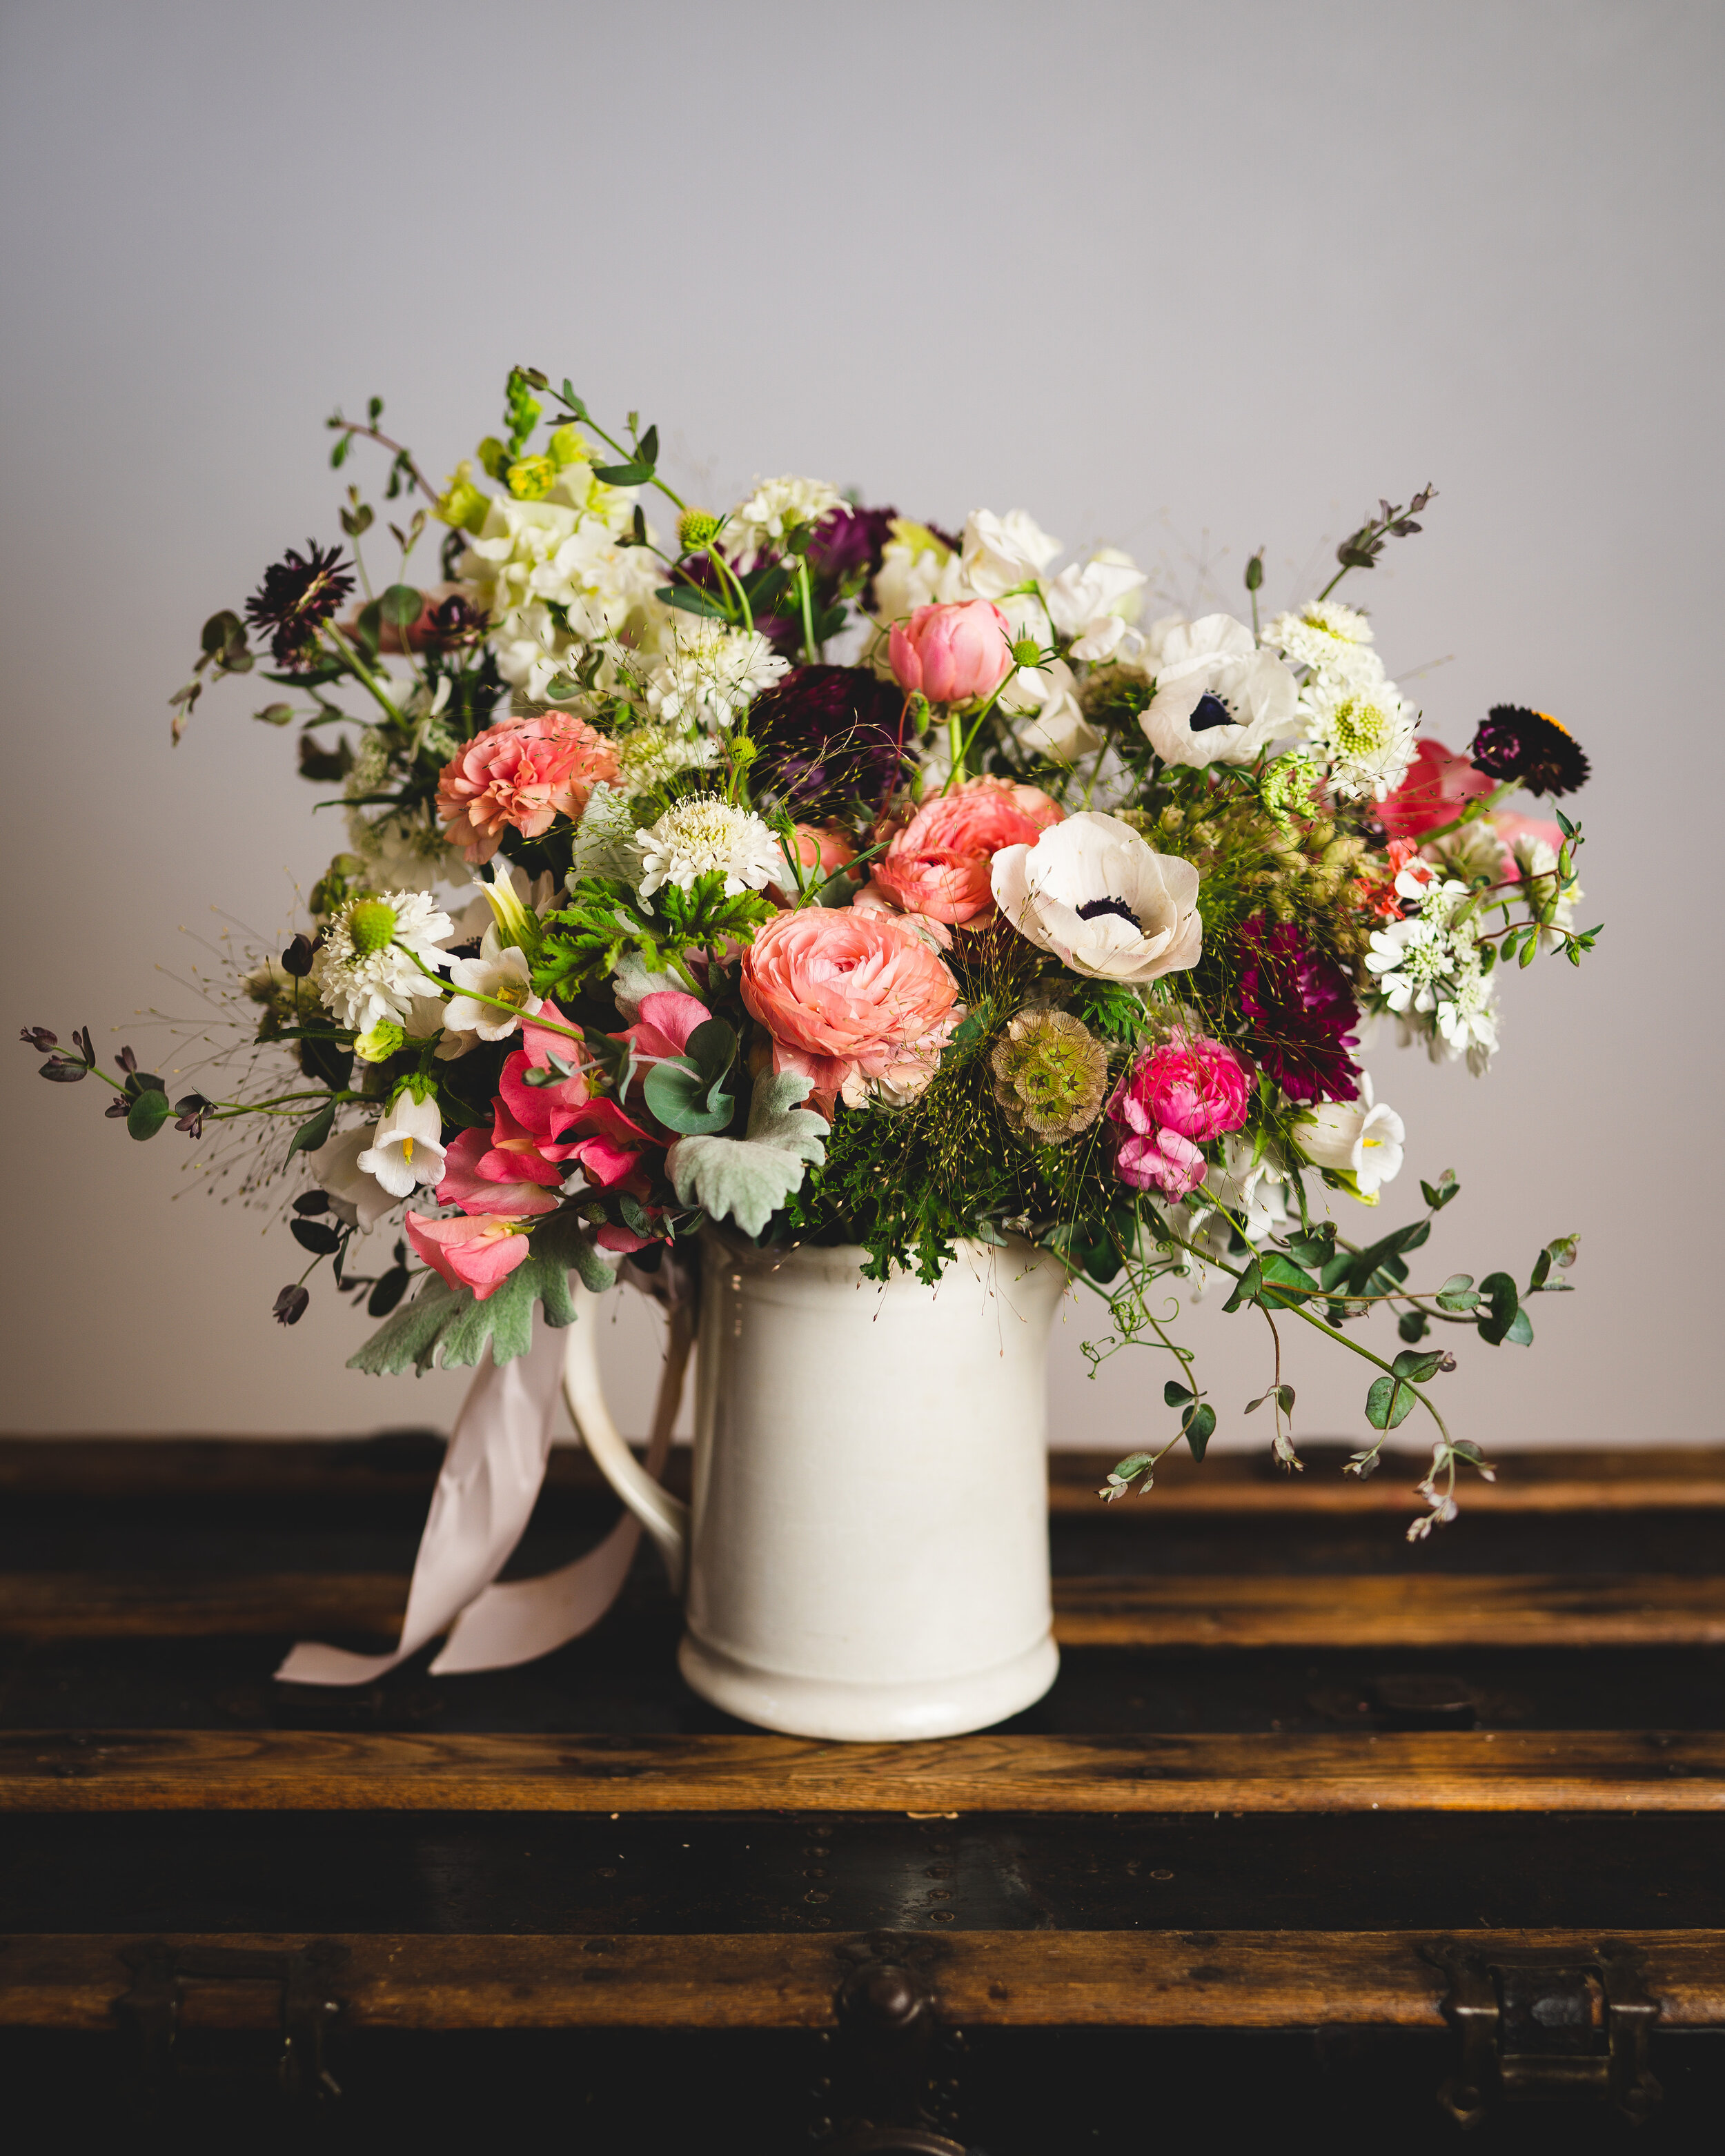 How to Preserve & Replant Wedding Bouquet Flowers